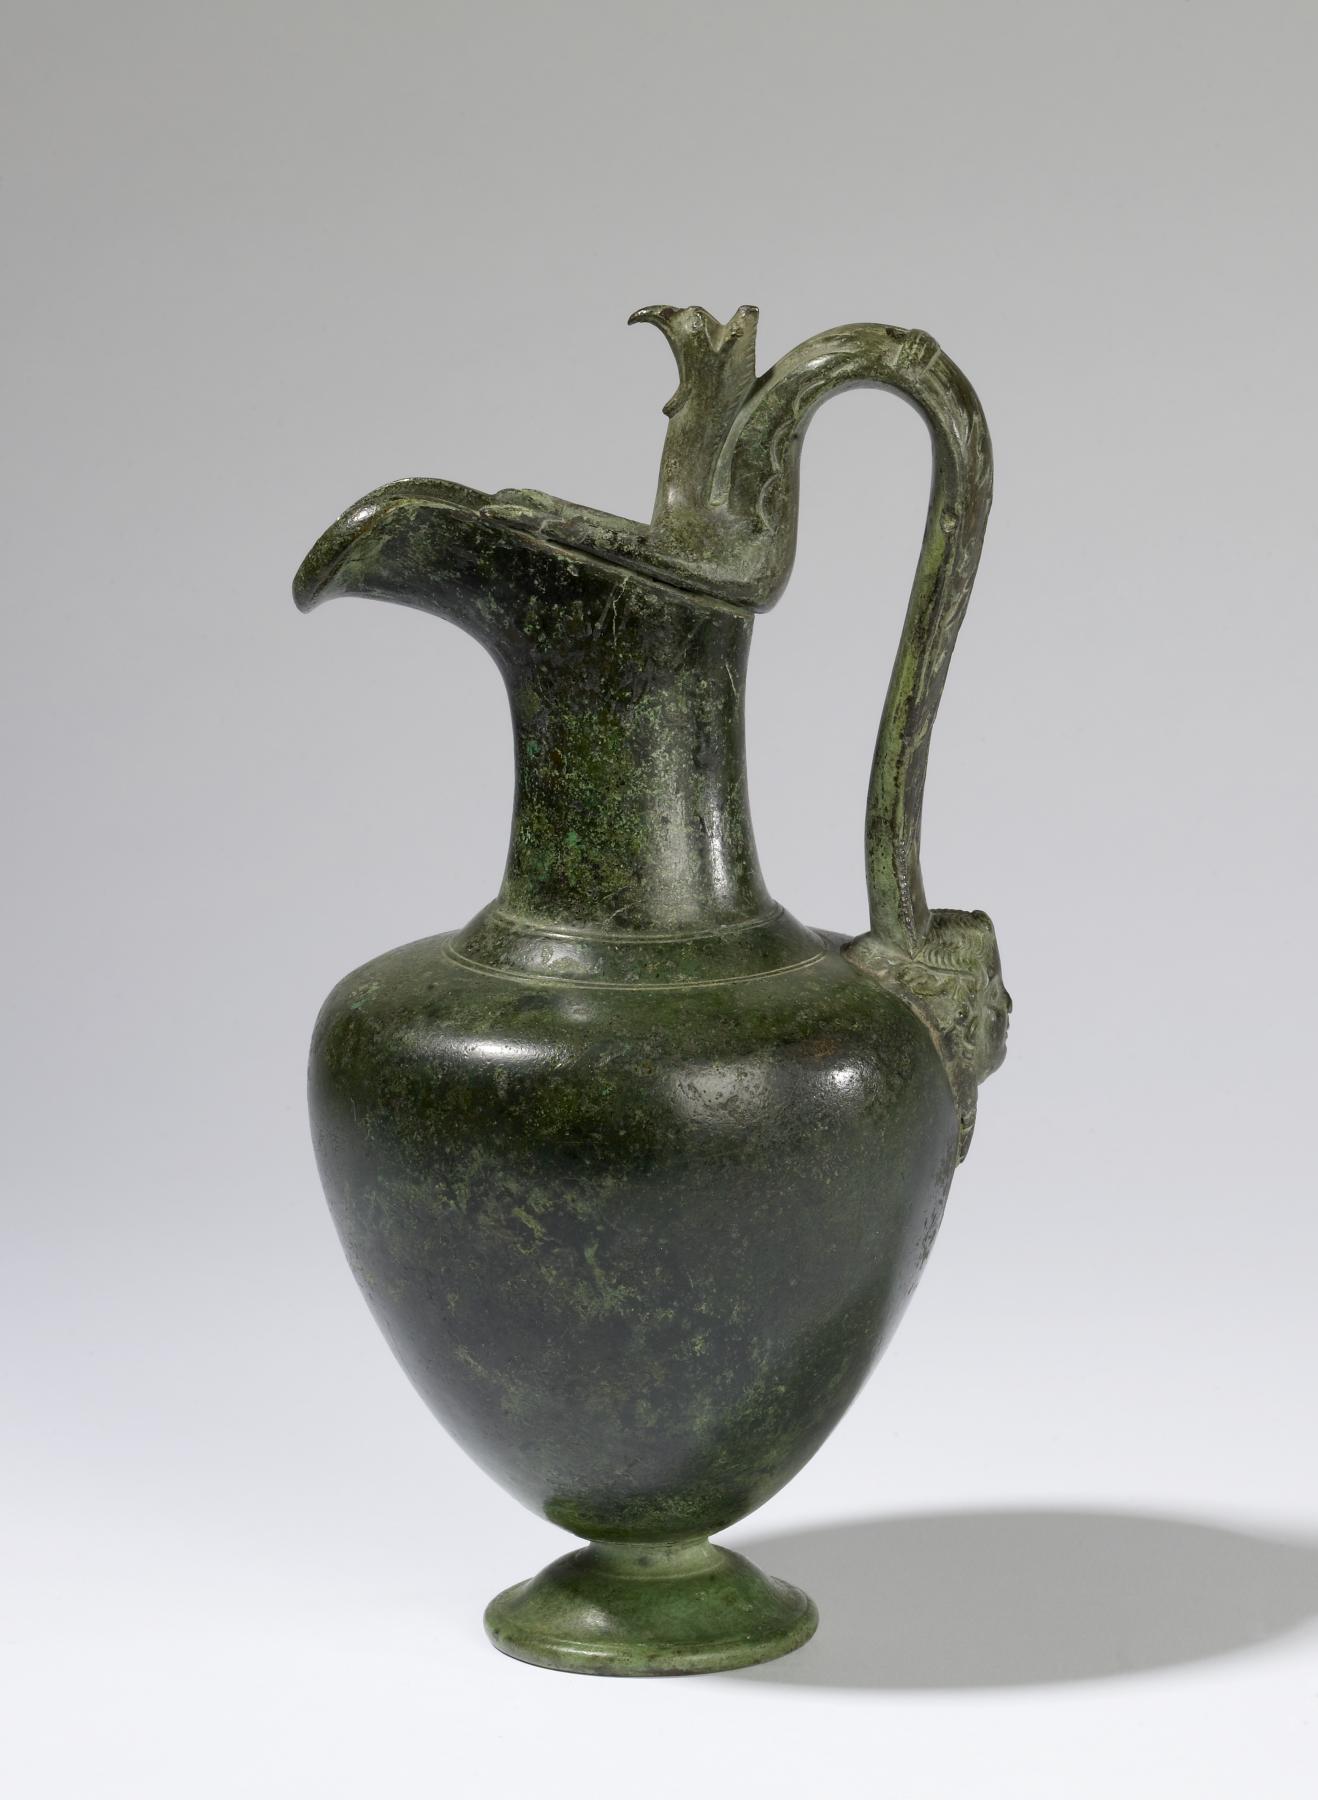 Beaked Pitcher | The Walters Art Museum